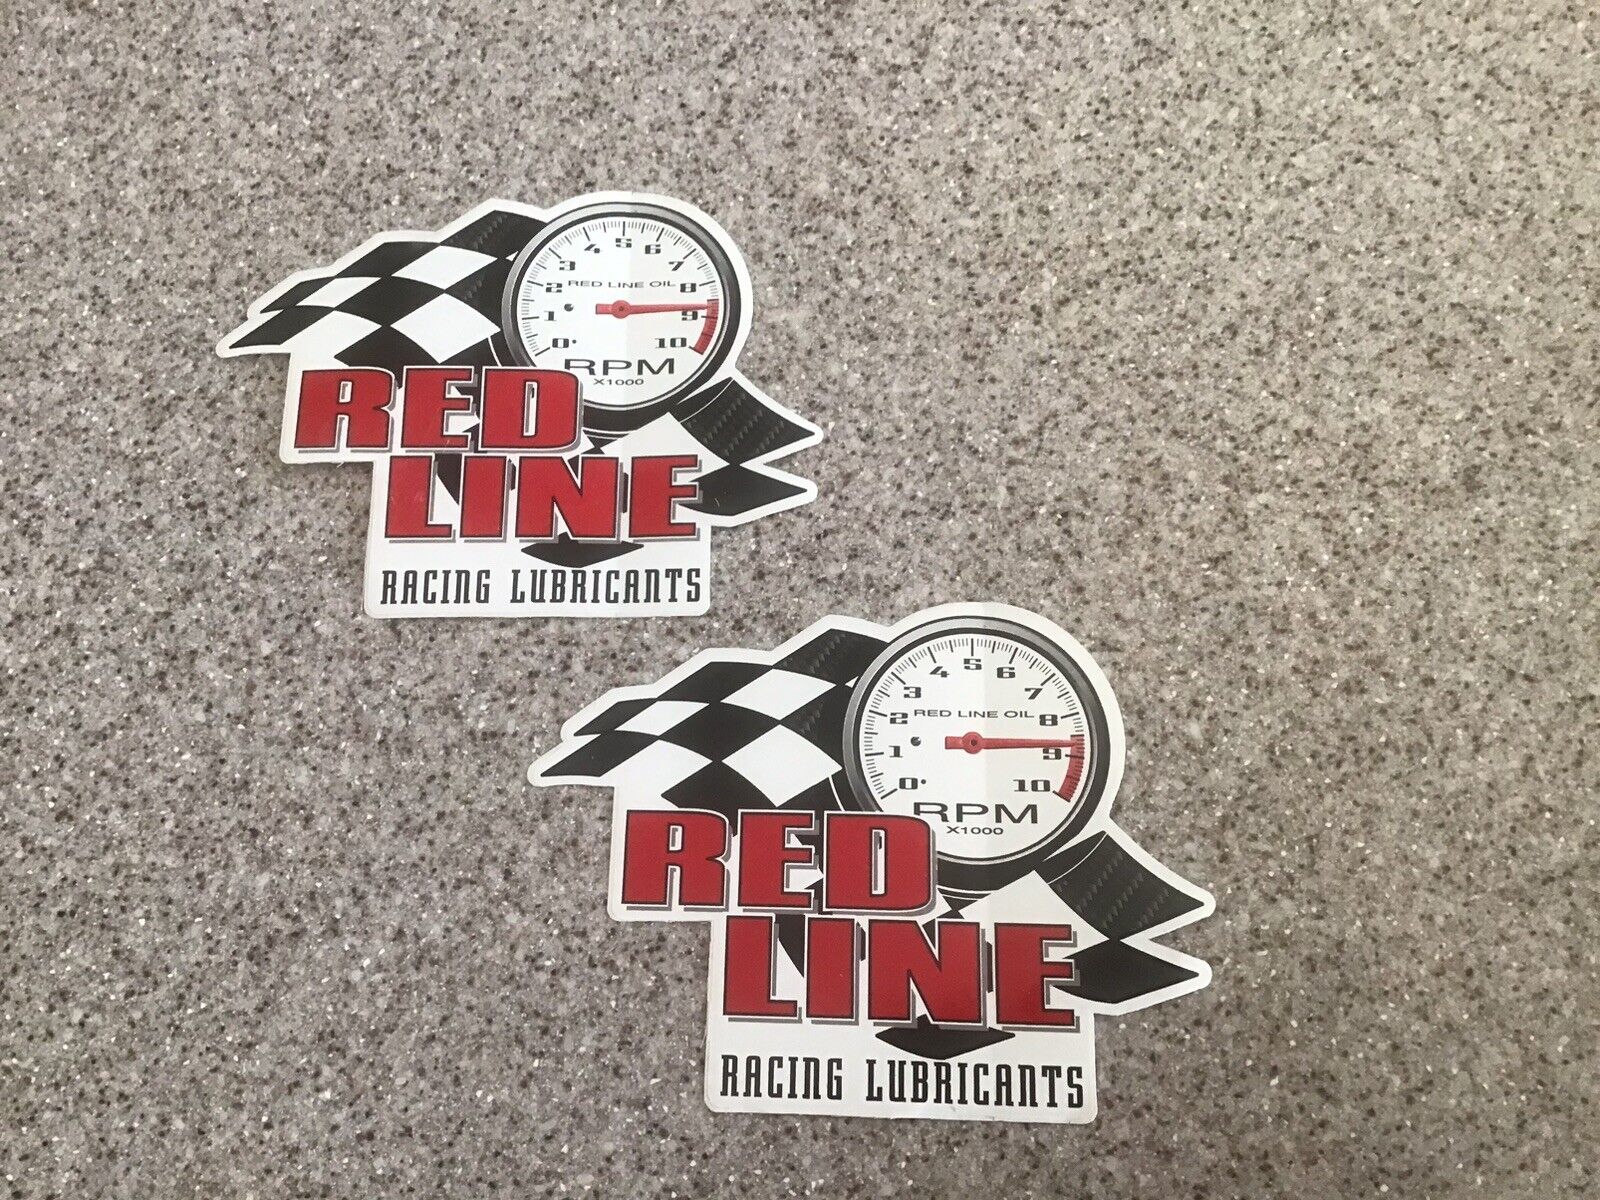 LOT OF 2 RED LINE RACING LUBRICANTS STICKERS